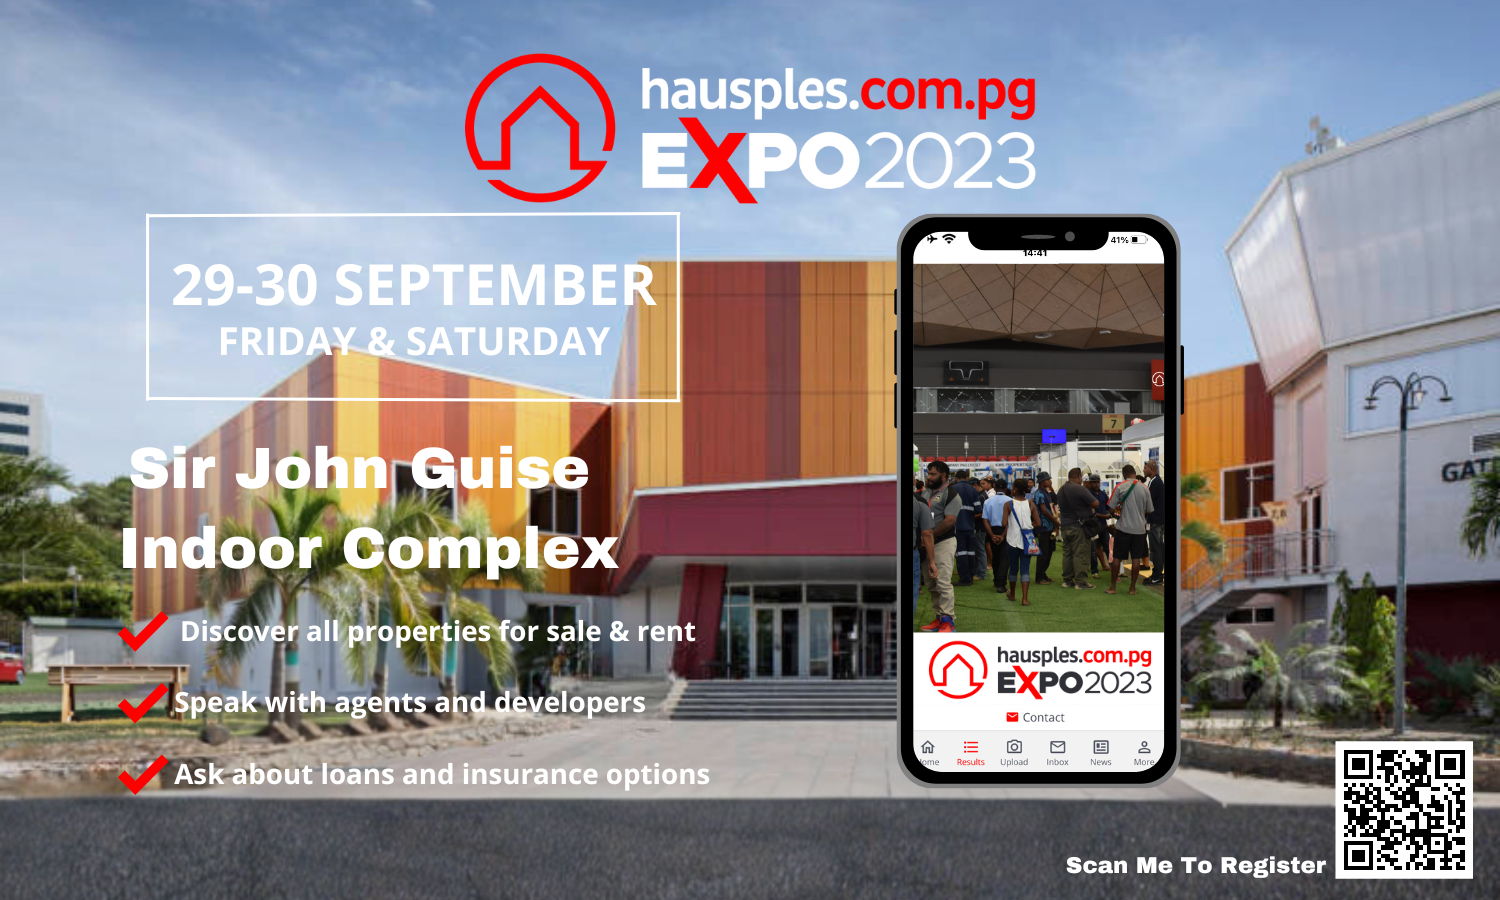 Hausples launches the 2023 Real Estate Expo